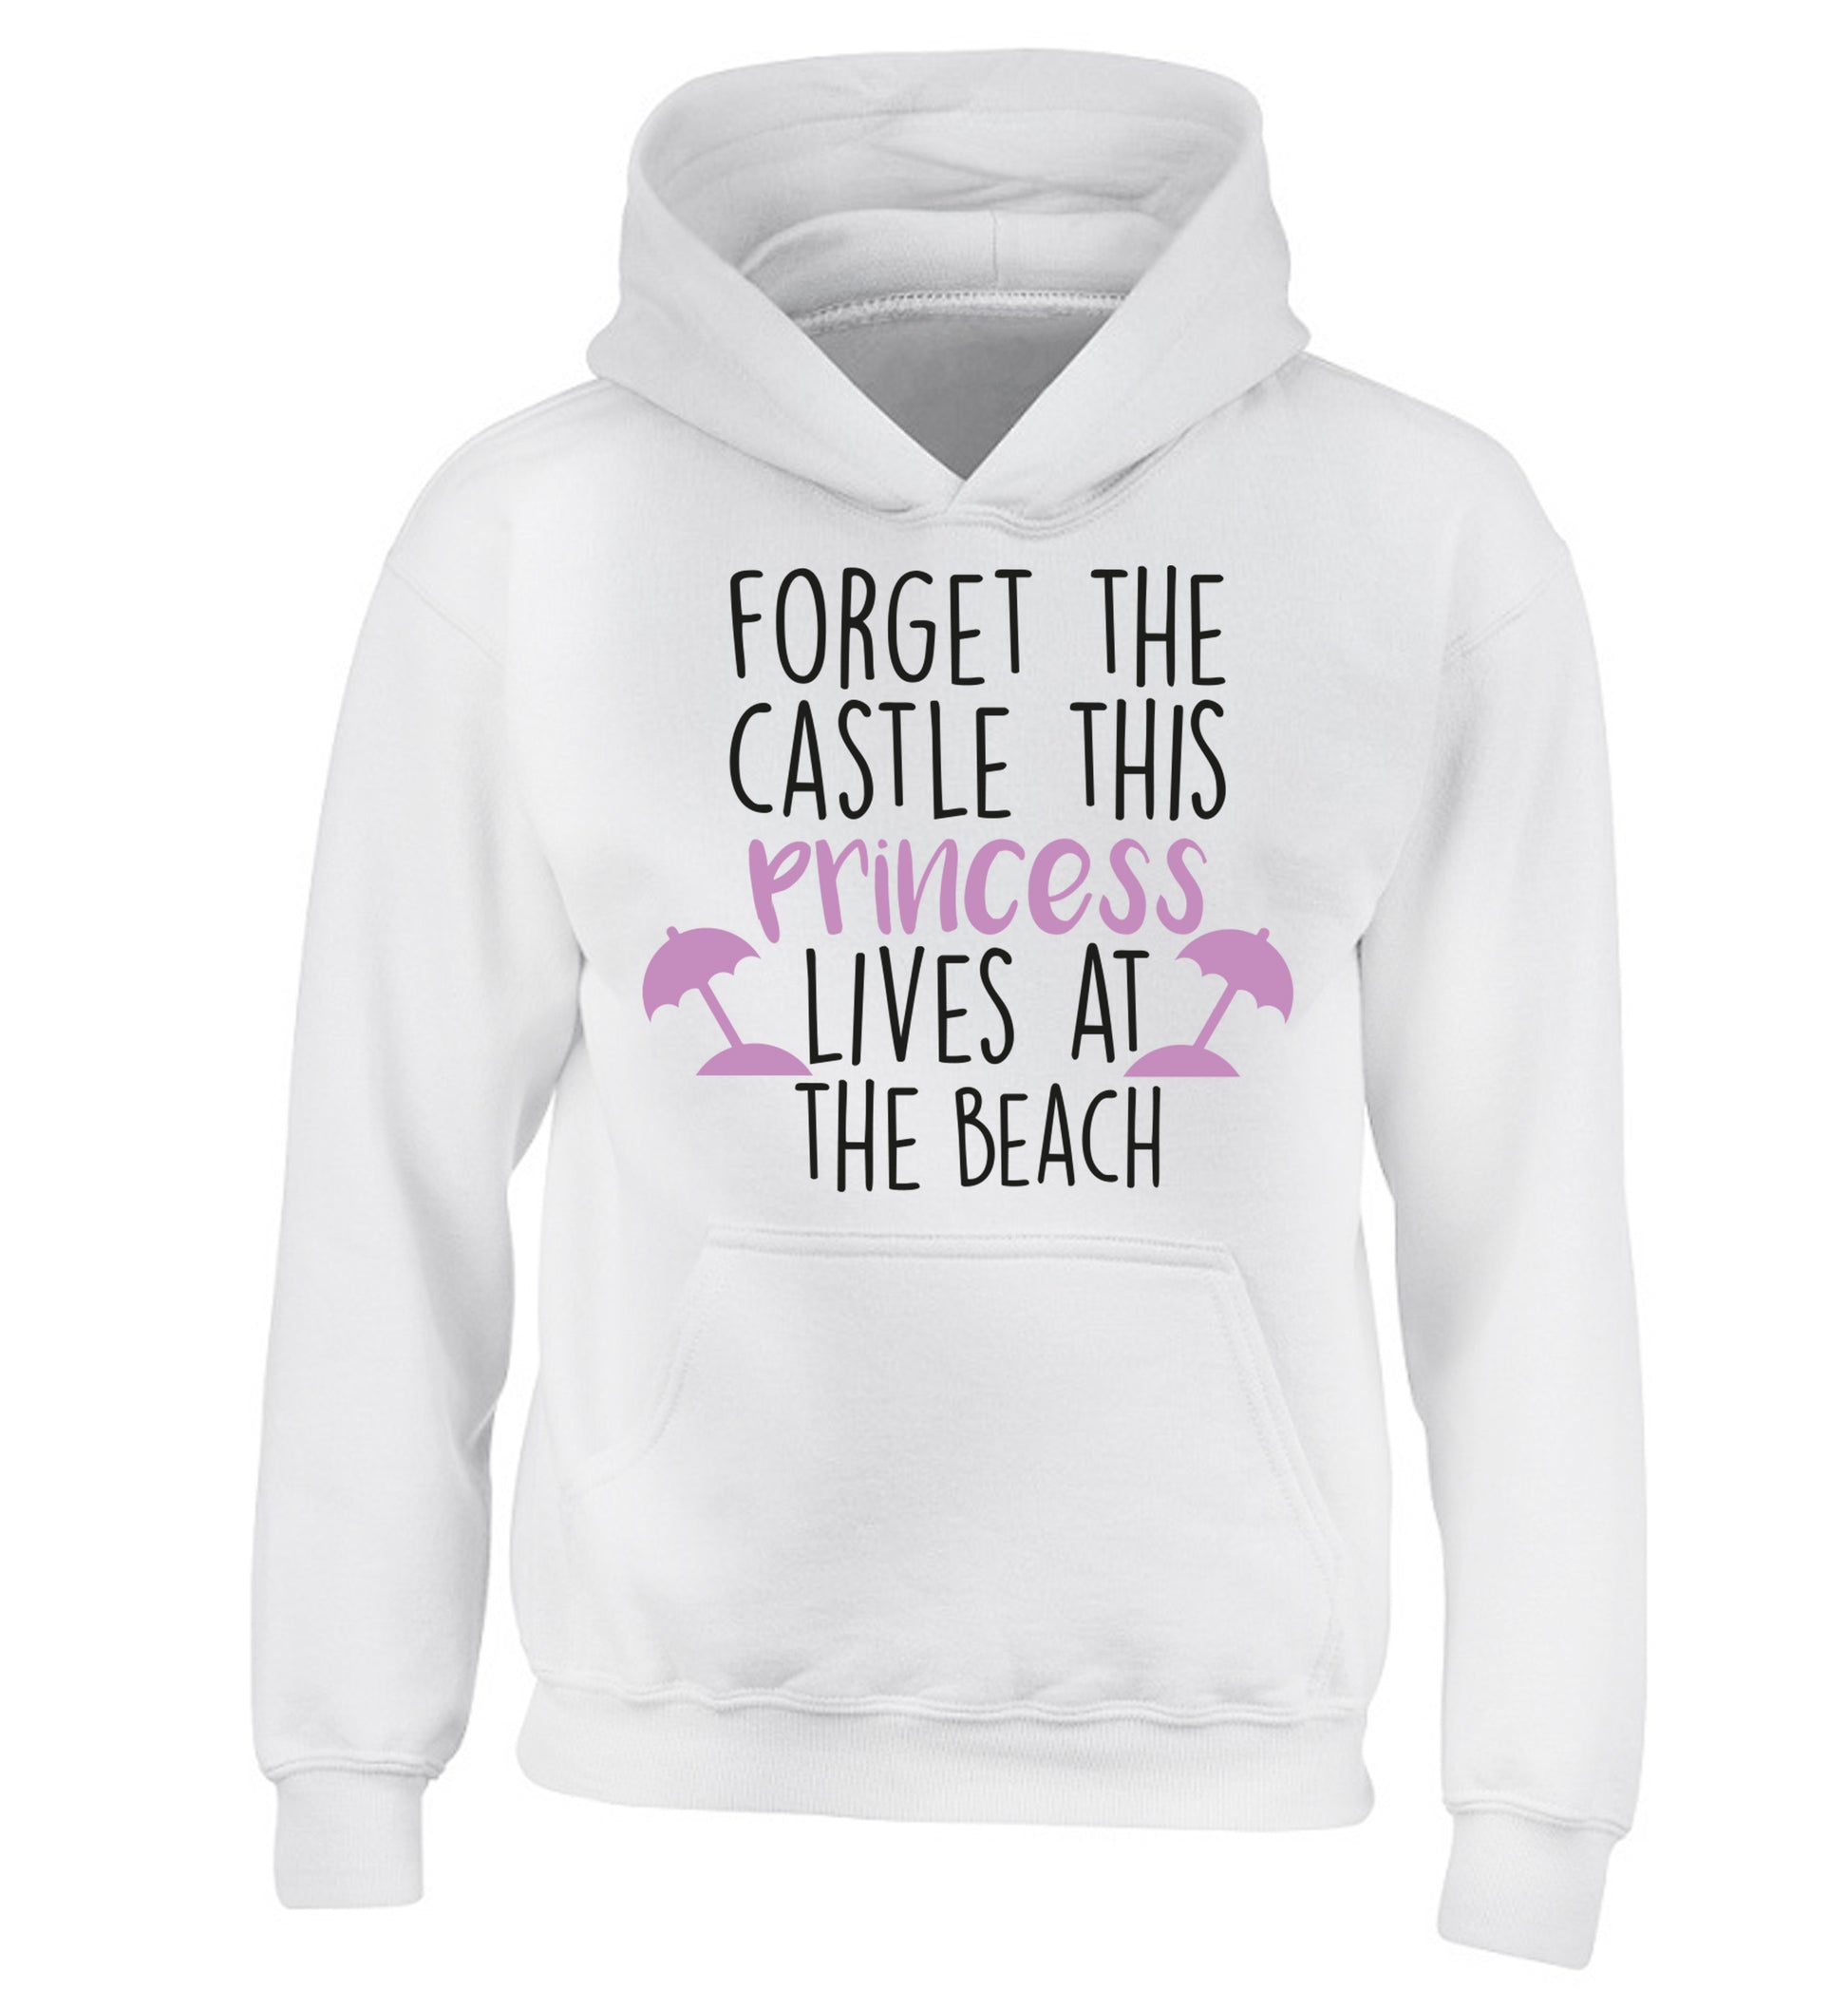 Forget the castle this princess lives at the beach children's white hoodie 12-14 Years